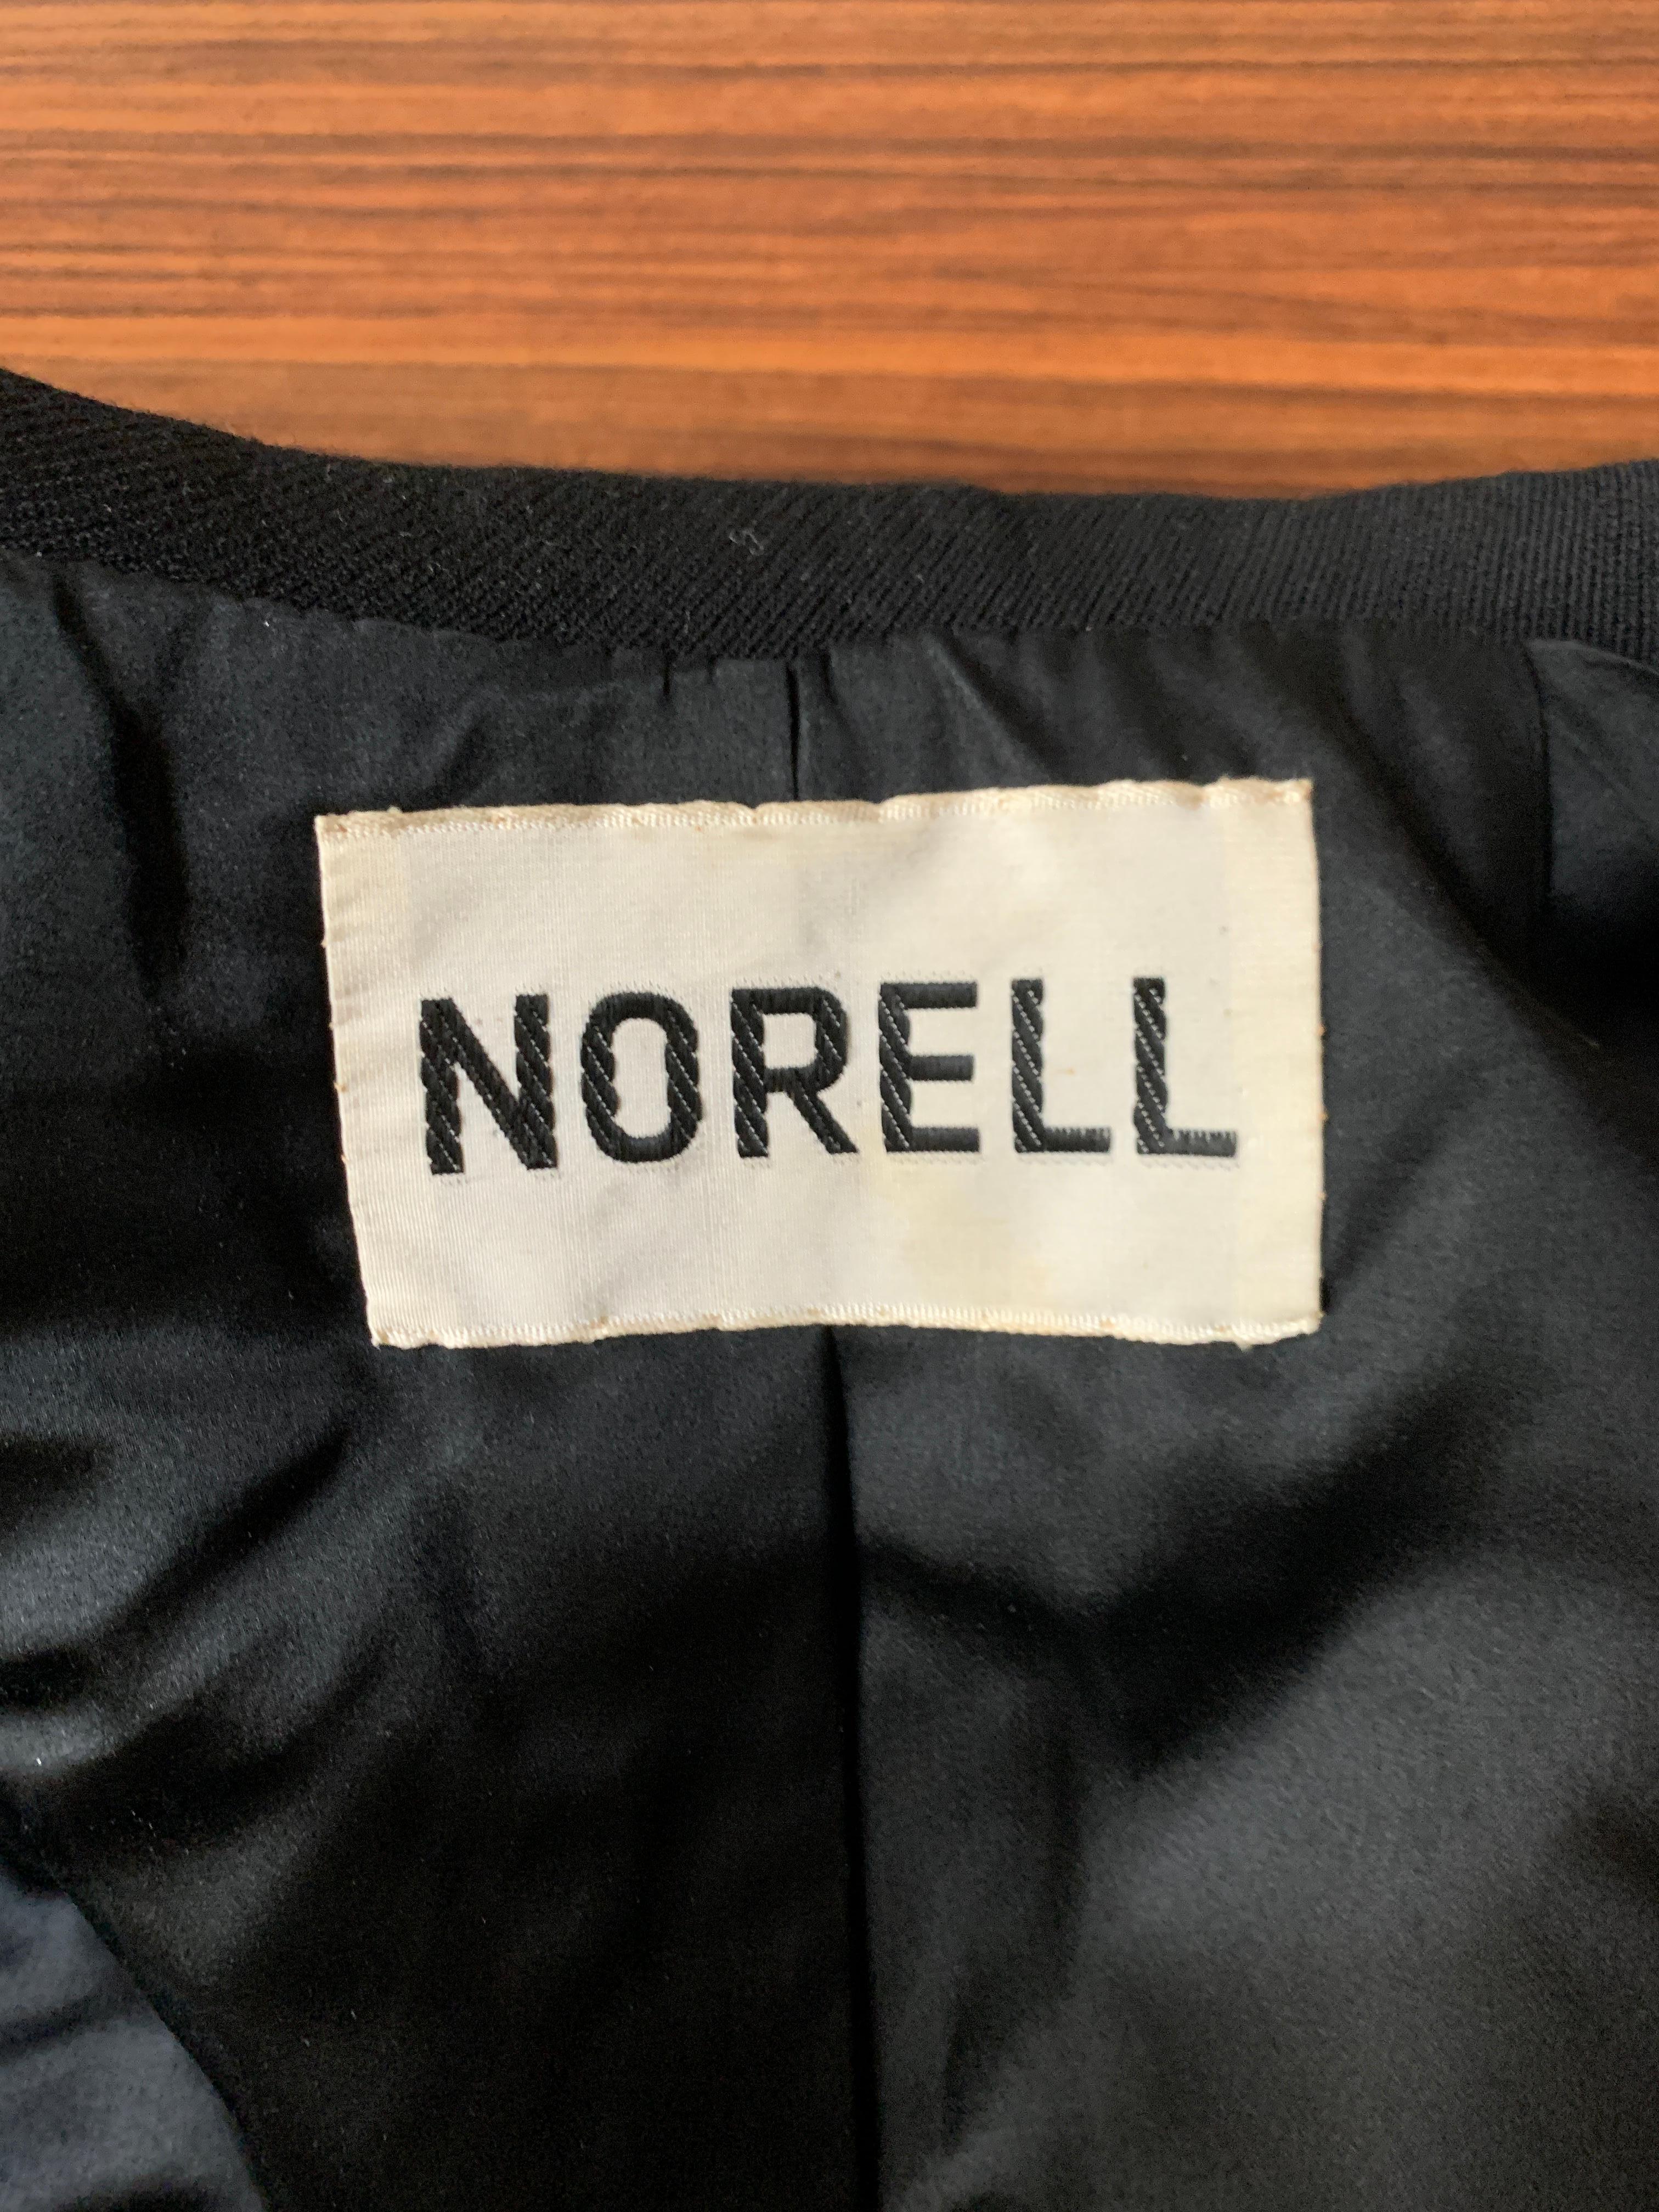 Norman Norell 1960s Black Belted Jacket with Statement Collar 3